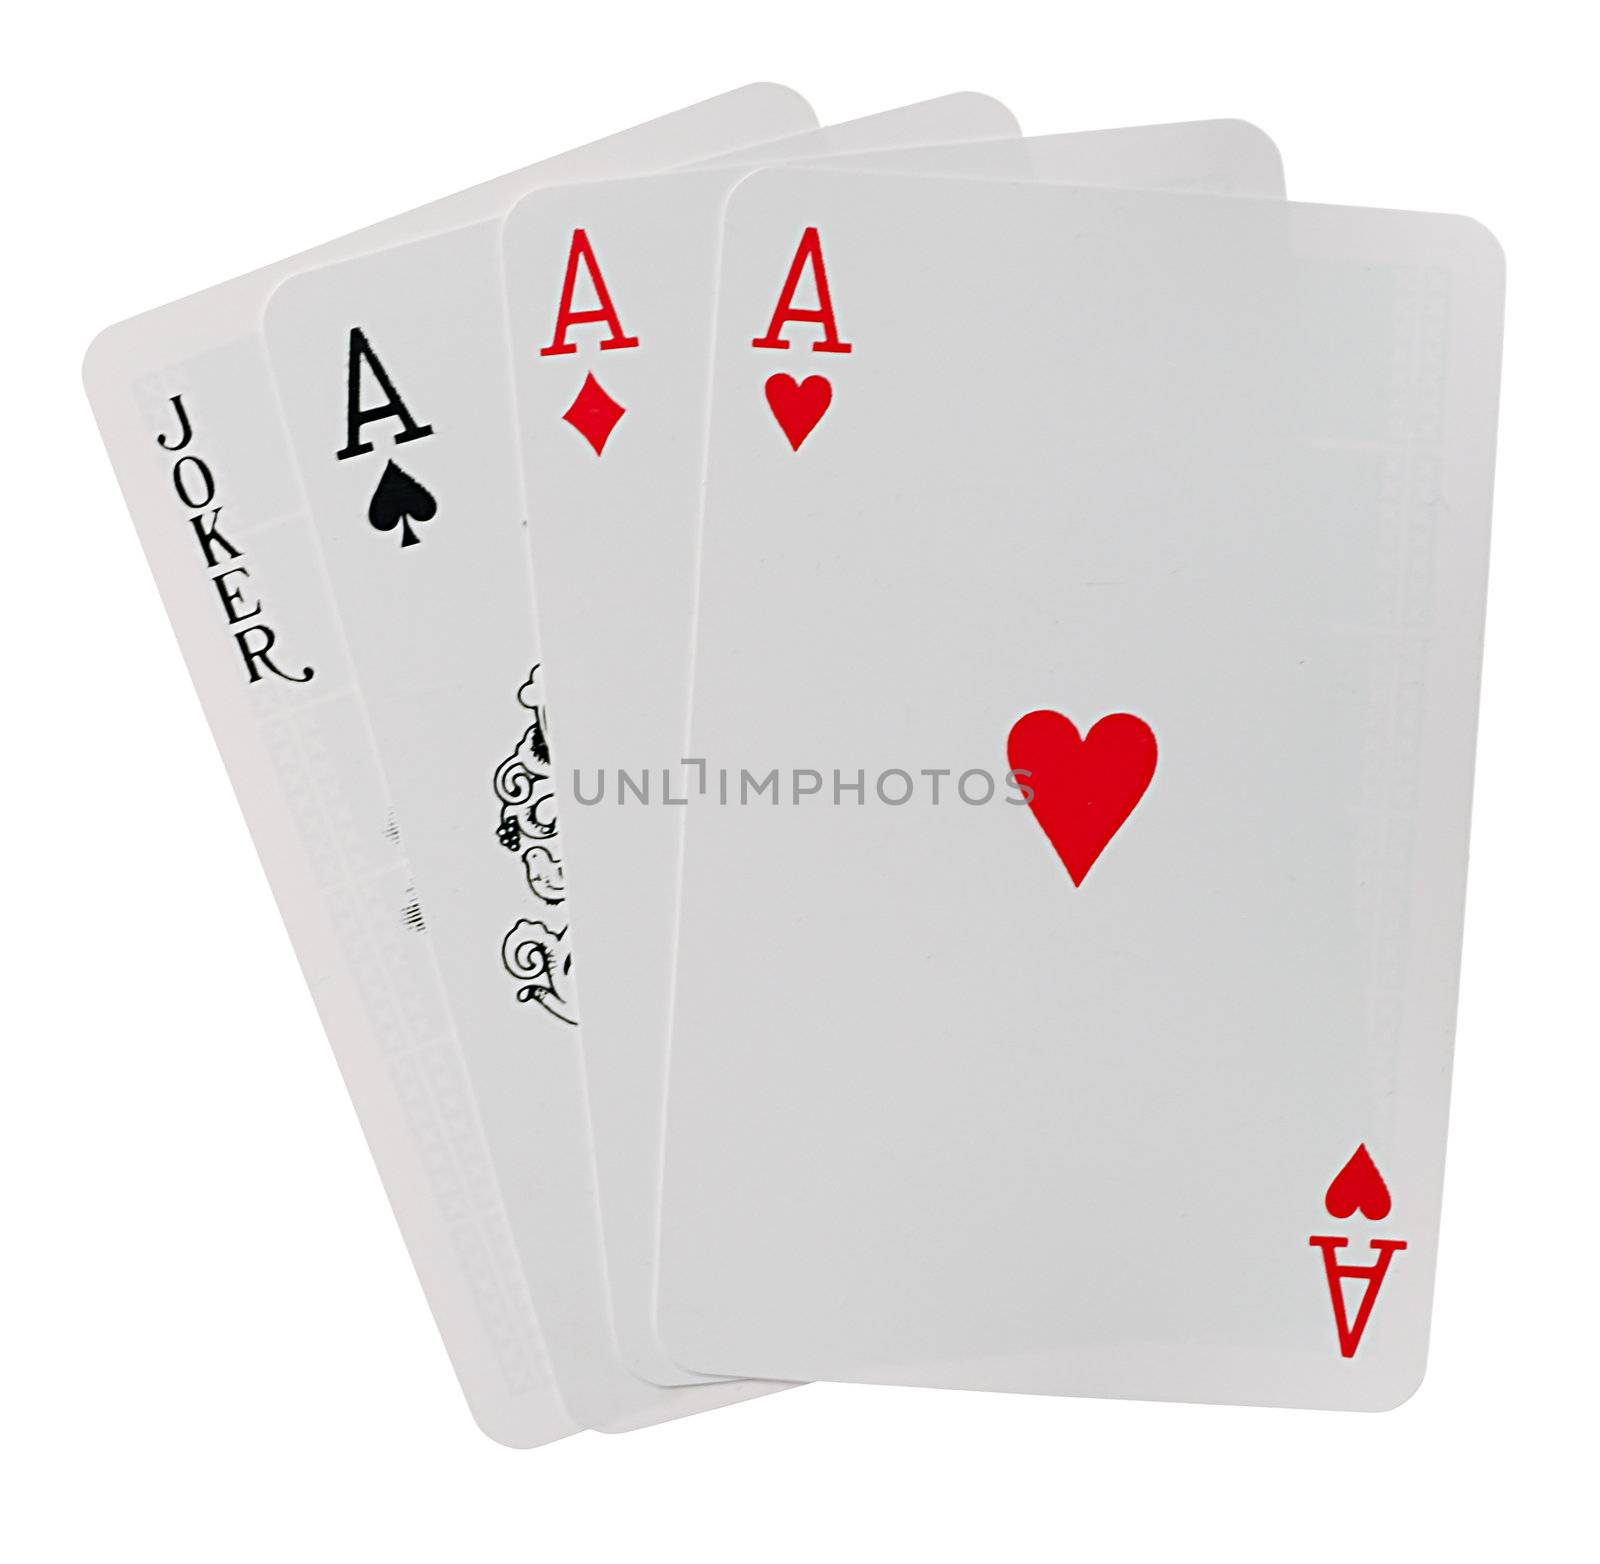 playing-cards on a white background are a risk